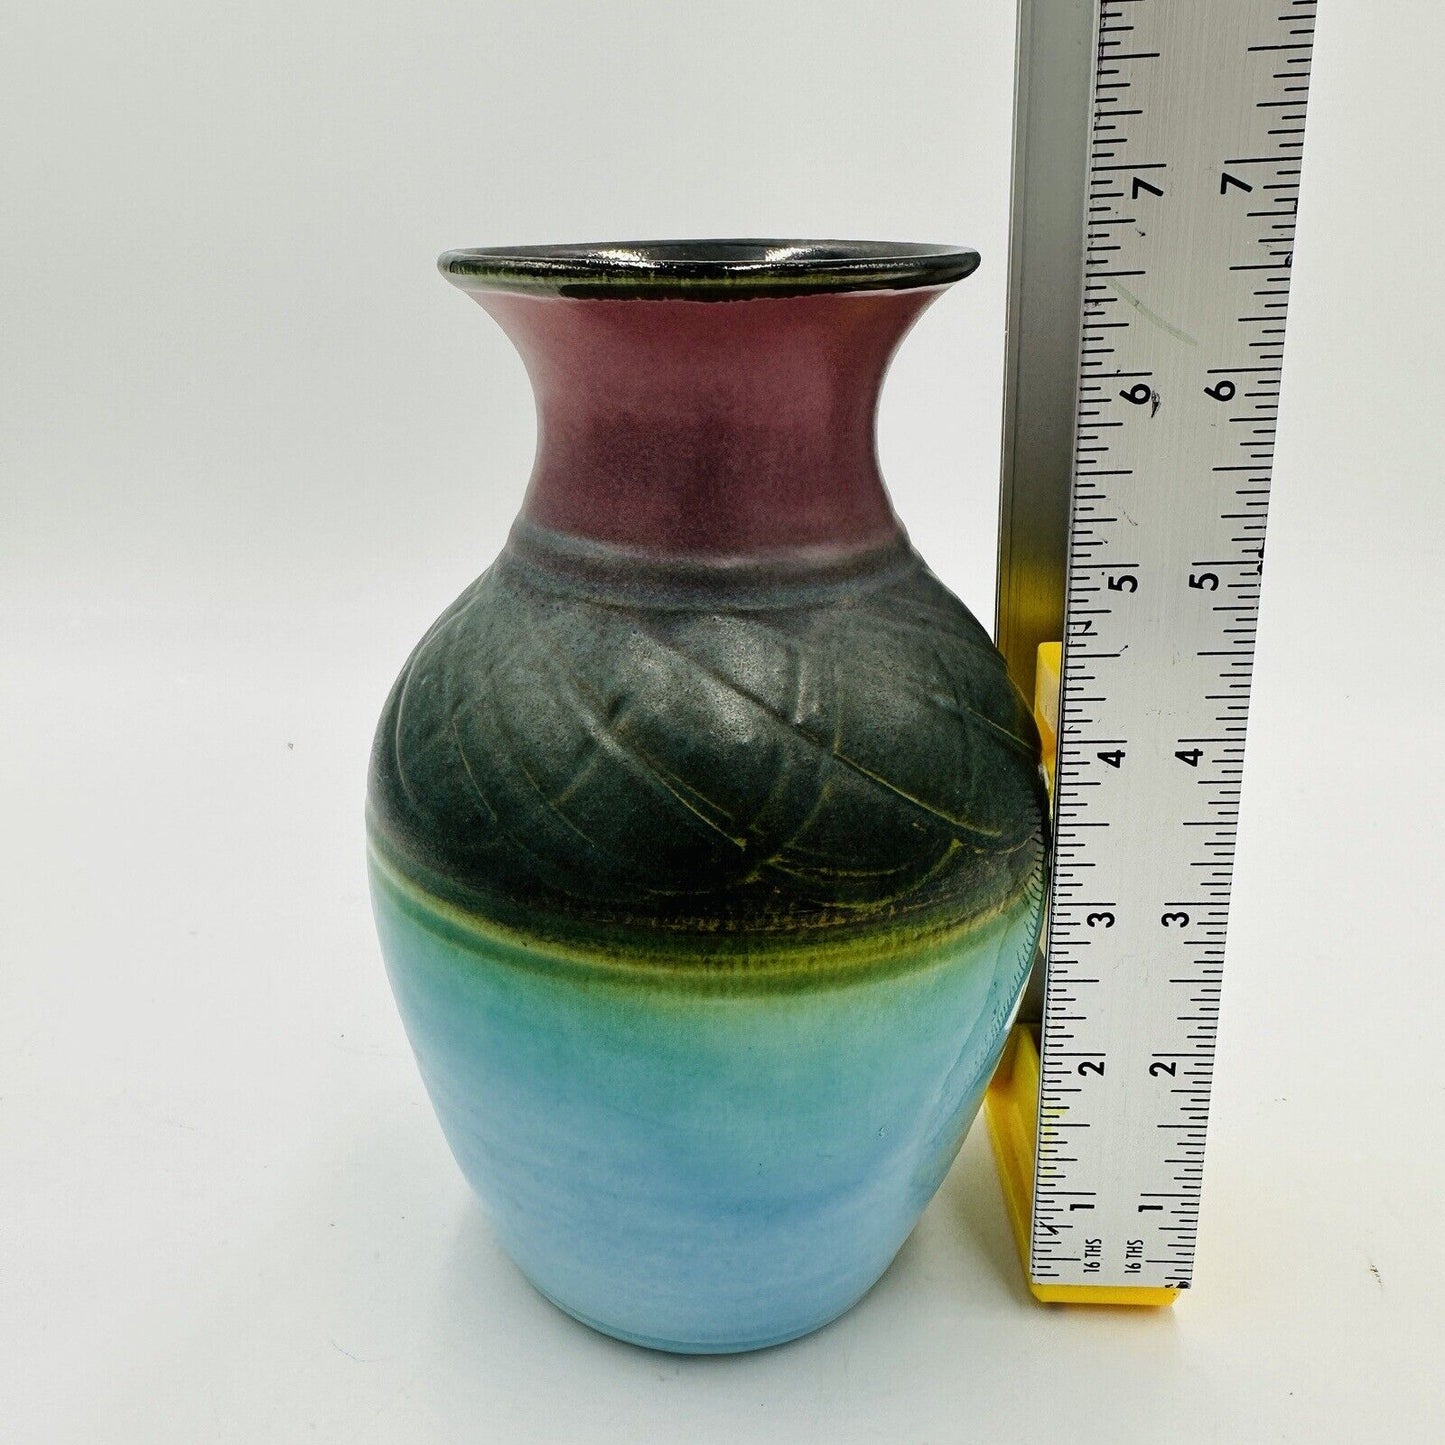 Dryden Hand Thrown Pottery Vase Signed Dated 2010 Purple Green Aqua 6.5”